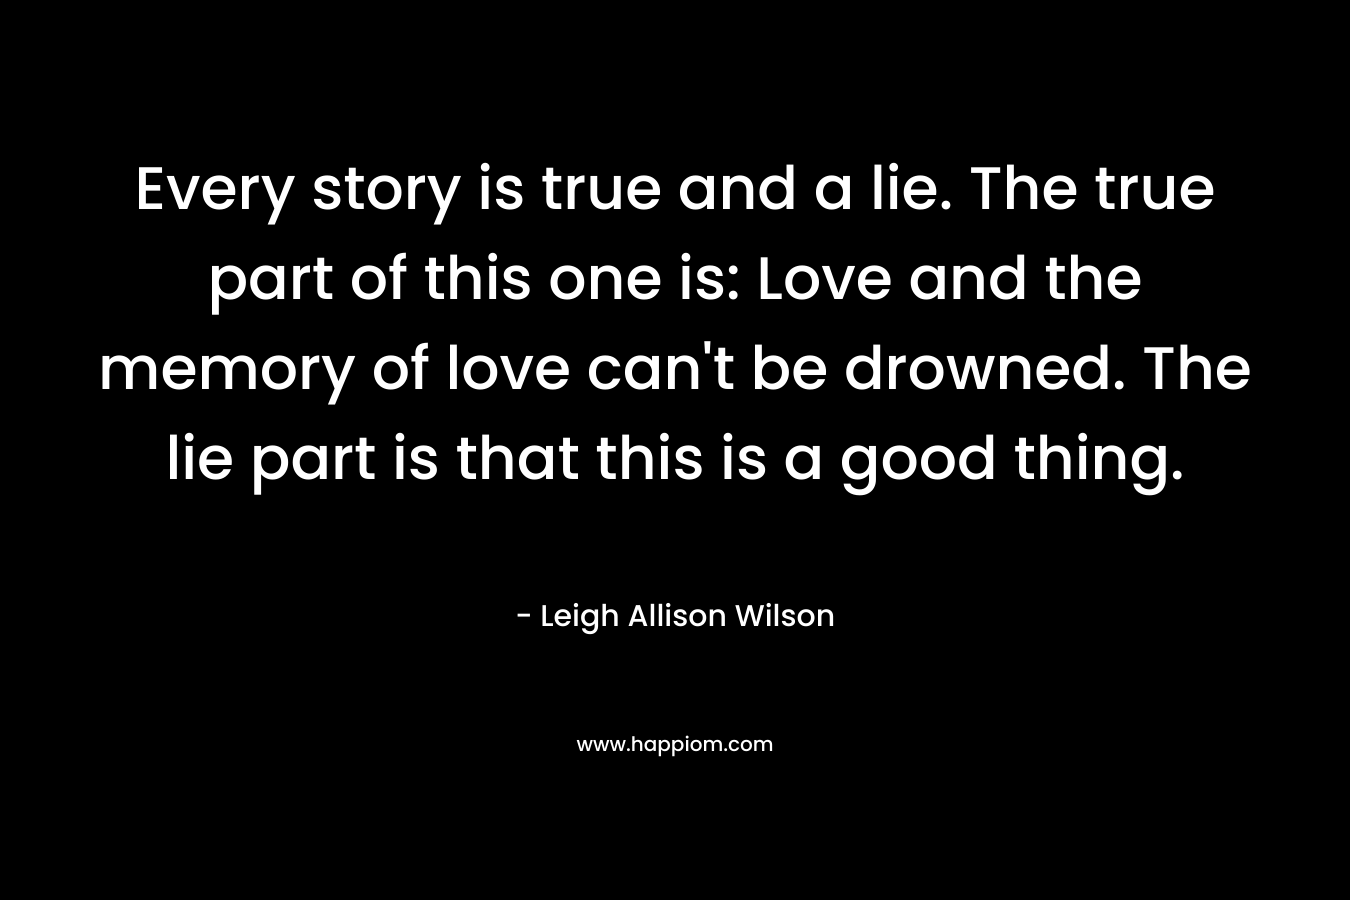 Every story is true and a lie. The true part of this one is: Love and the memory of love can’t be drowned. The lie part is that this is a good thing. – Leigh Allison Wilson